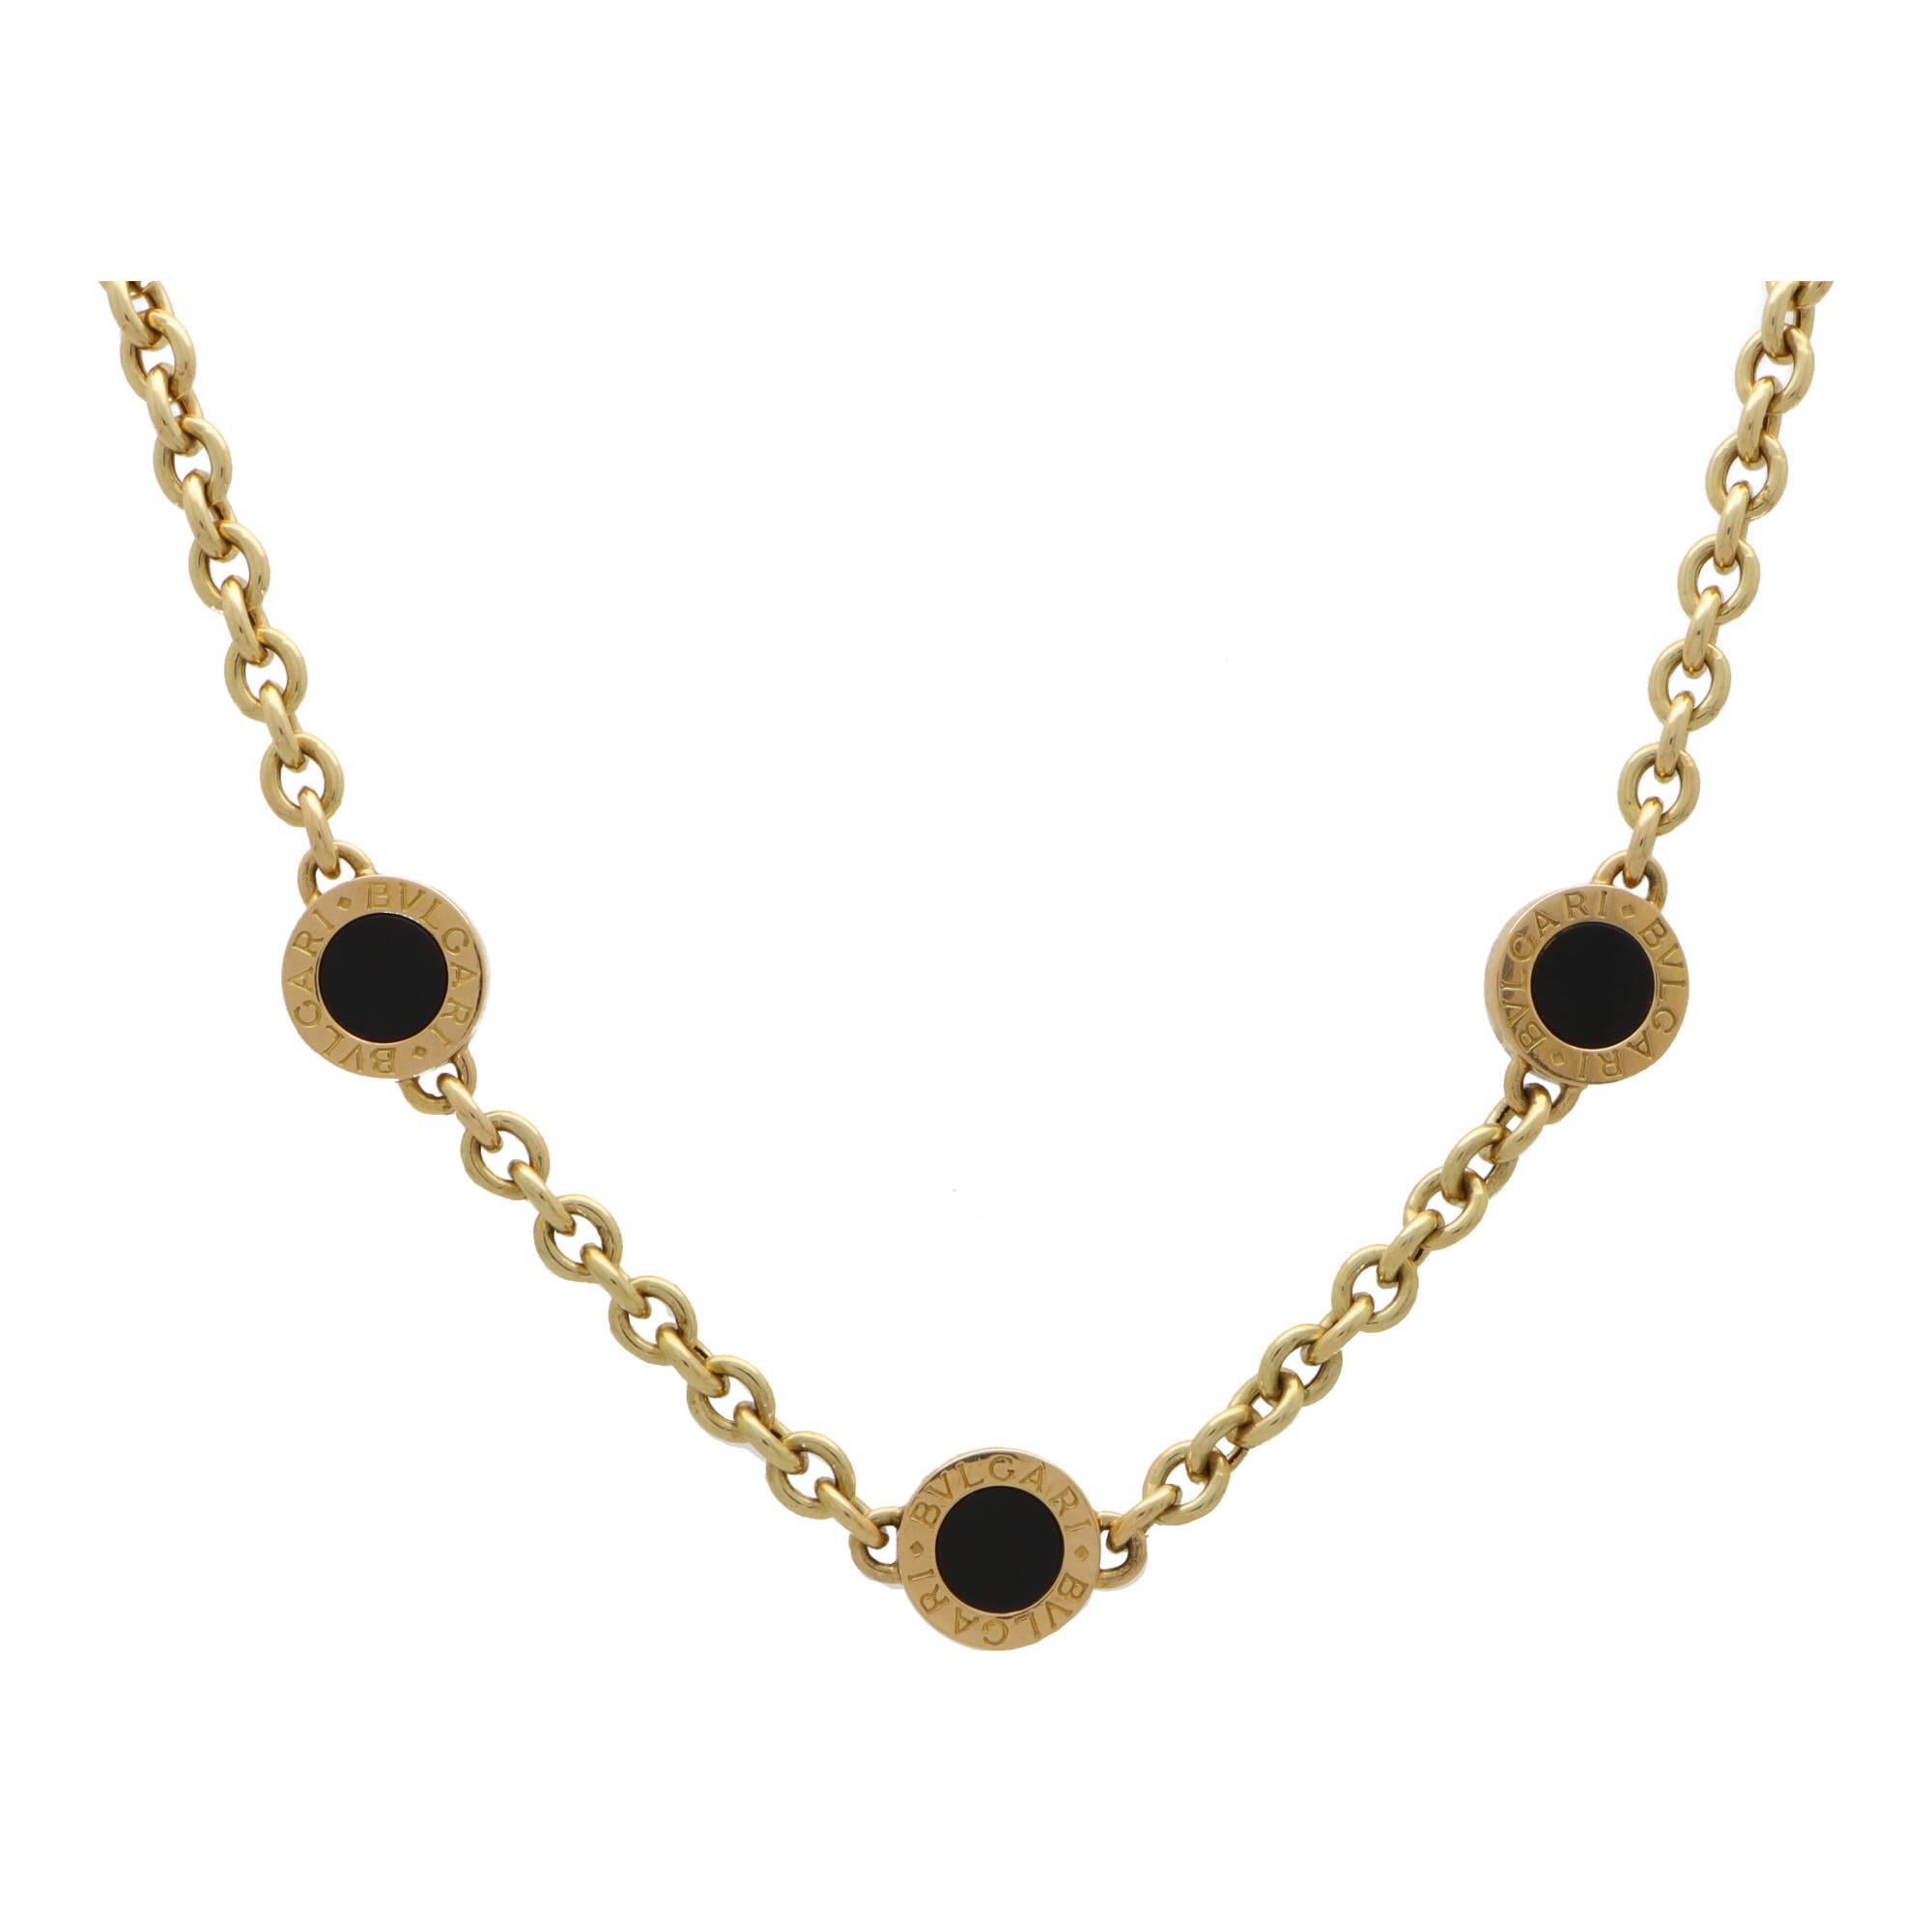 Vintage Bvlgari Onyx Chunky Disc Necklace Set in 18k Yellow Gold